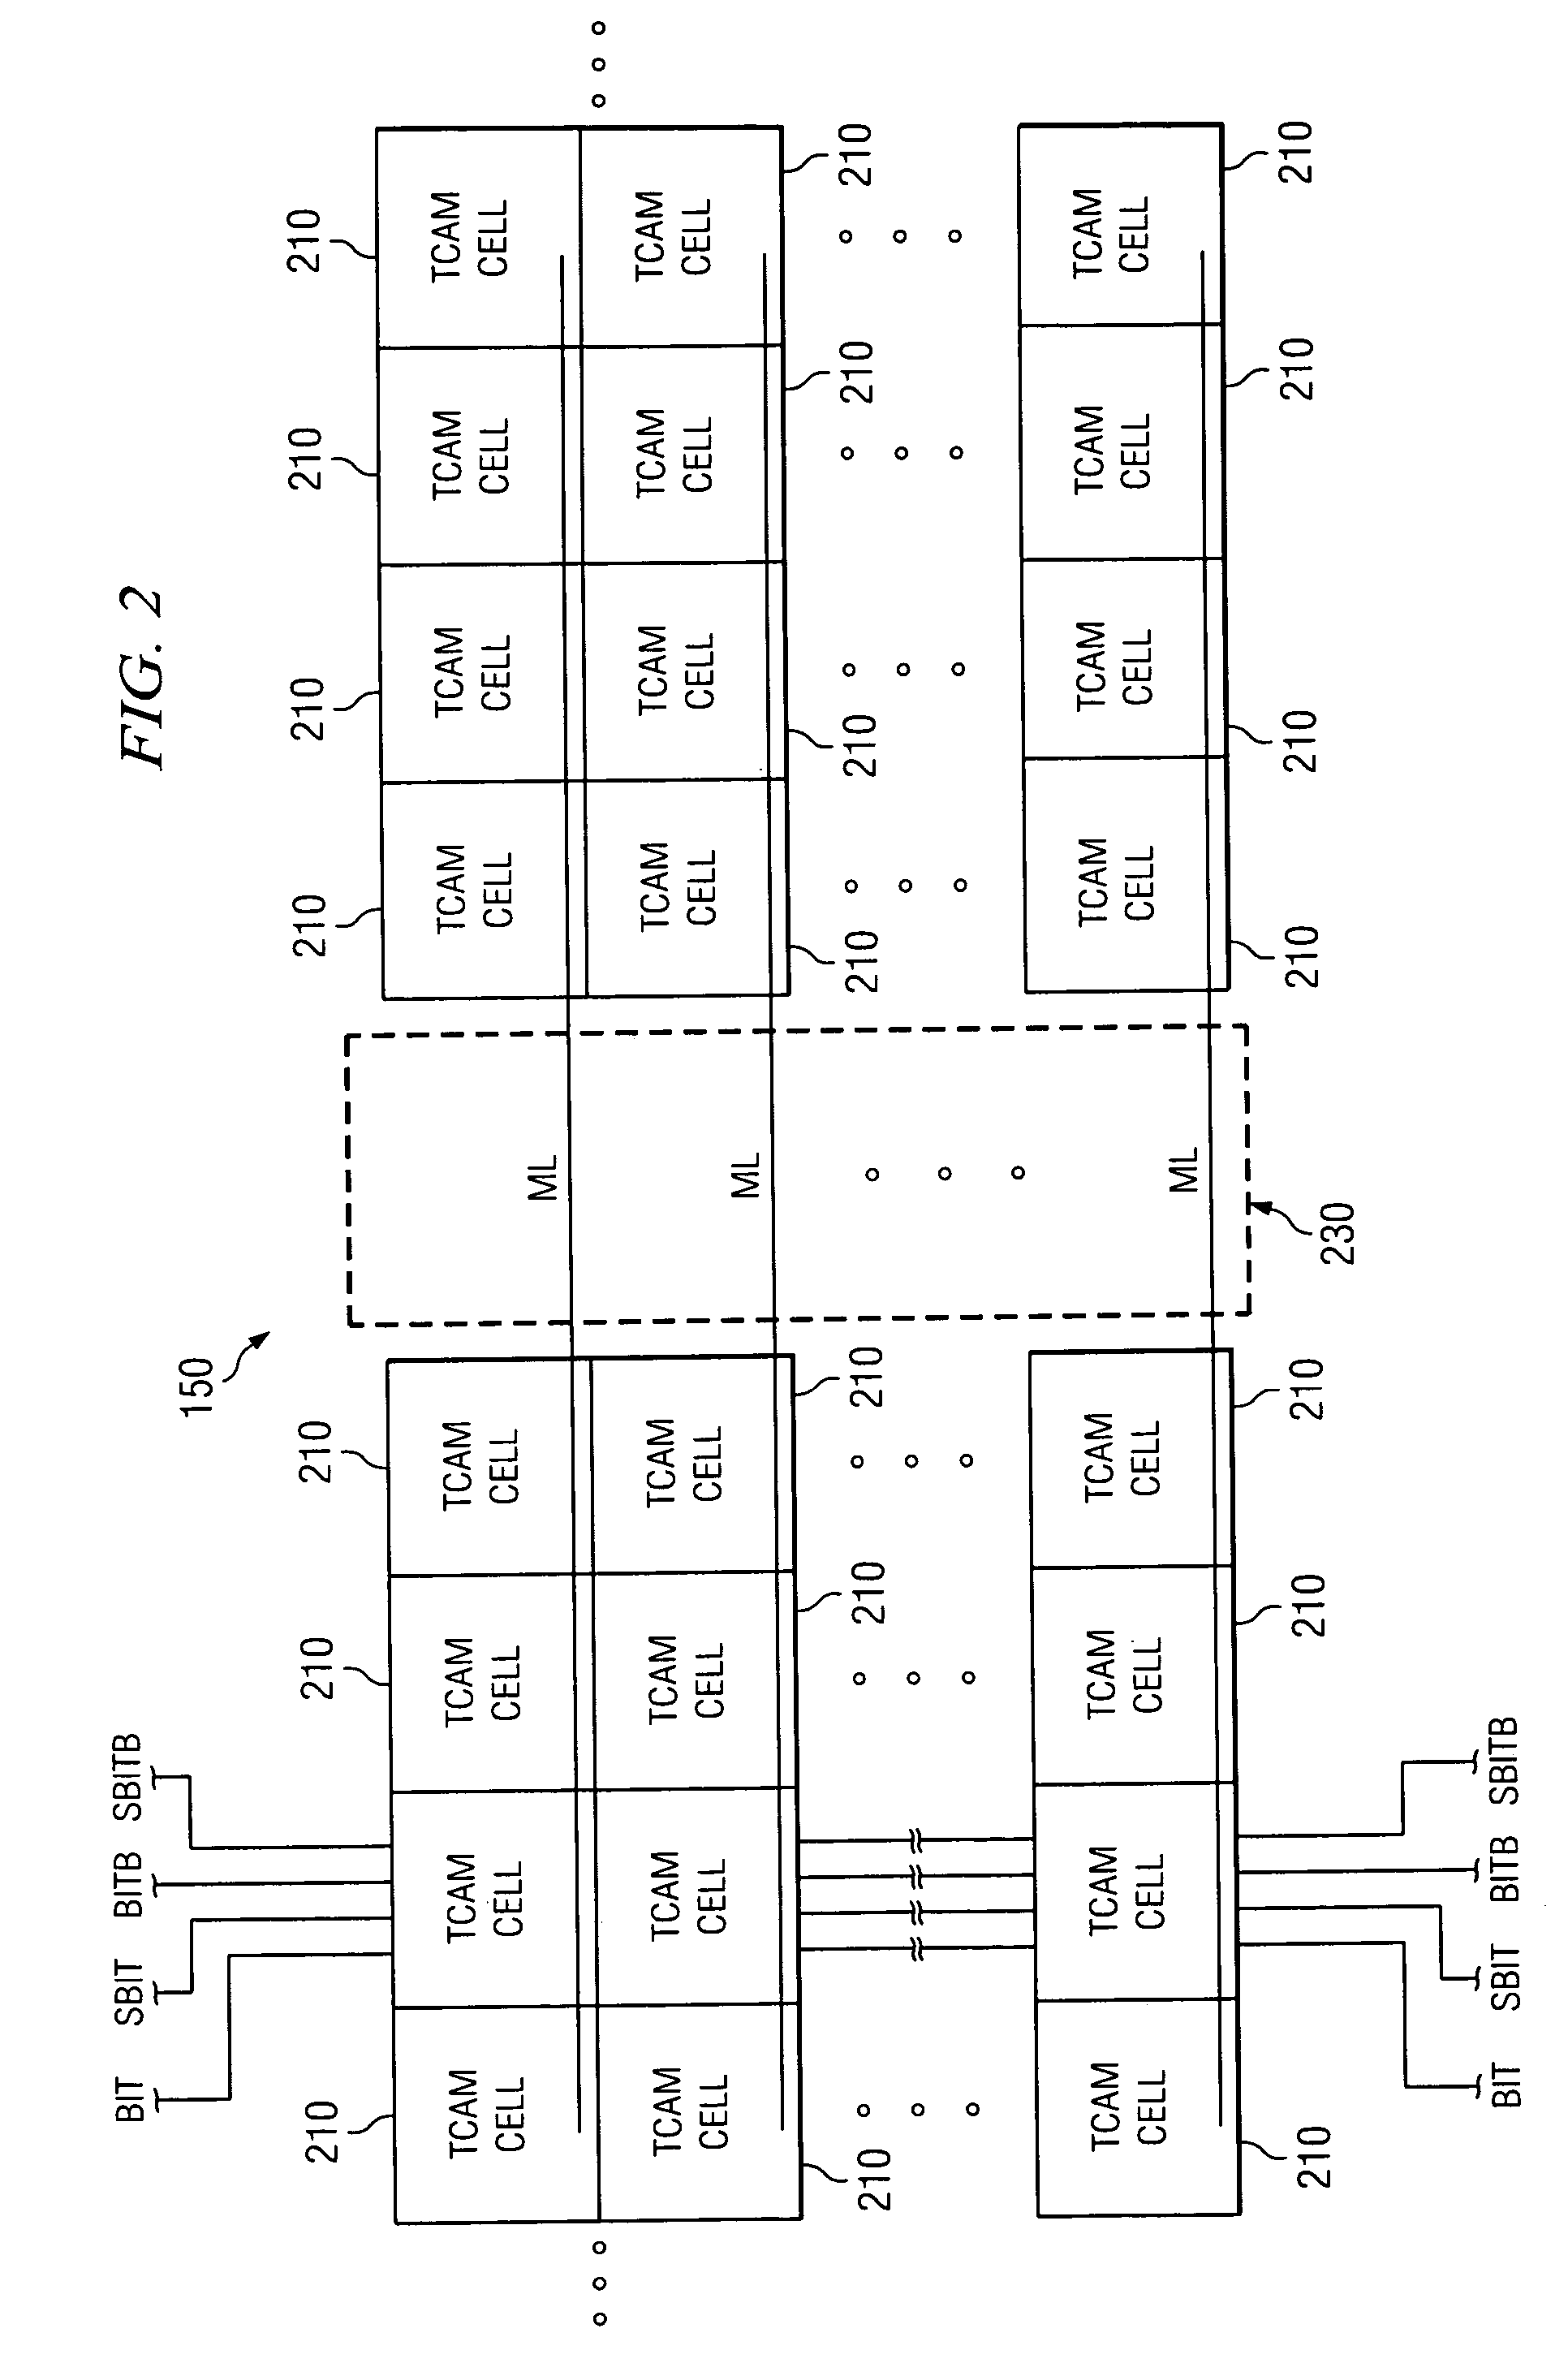 Area efficient stacked TCAM cell for fully parallel search